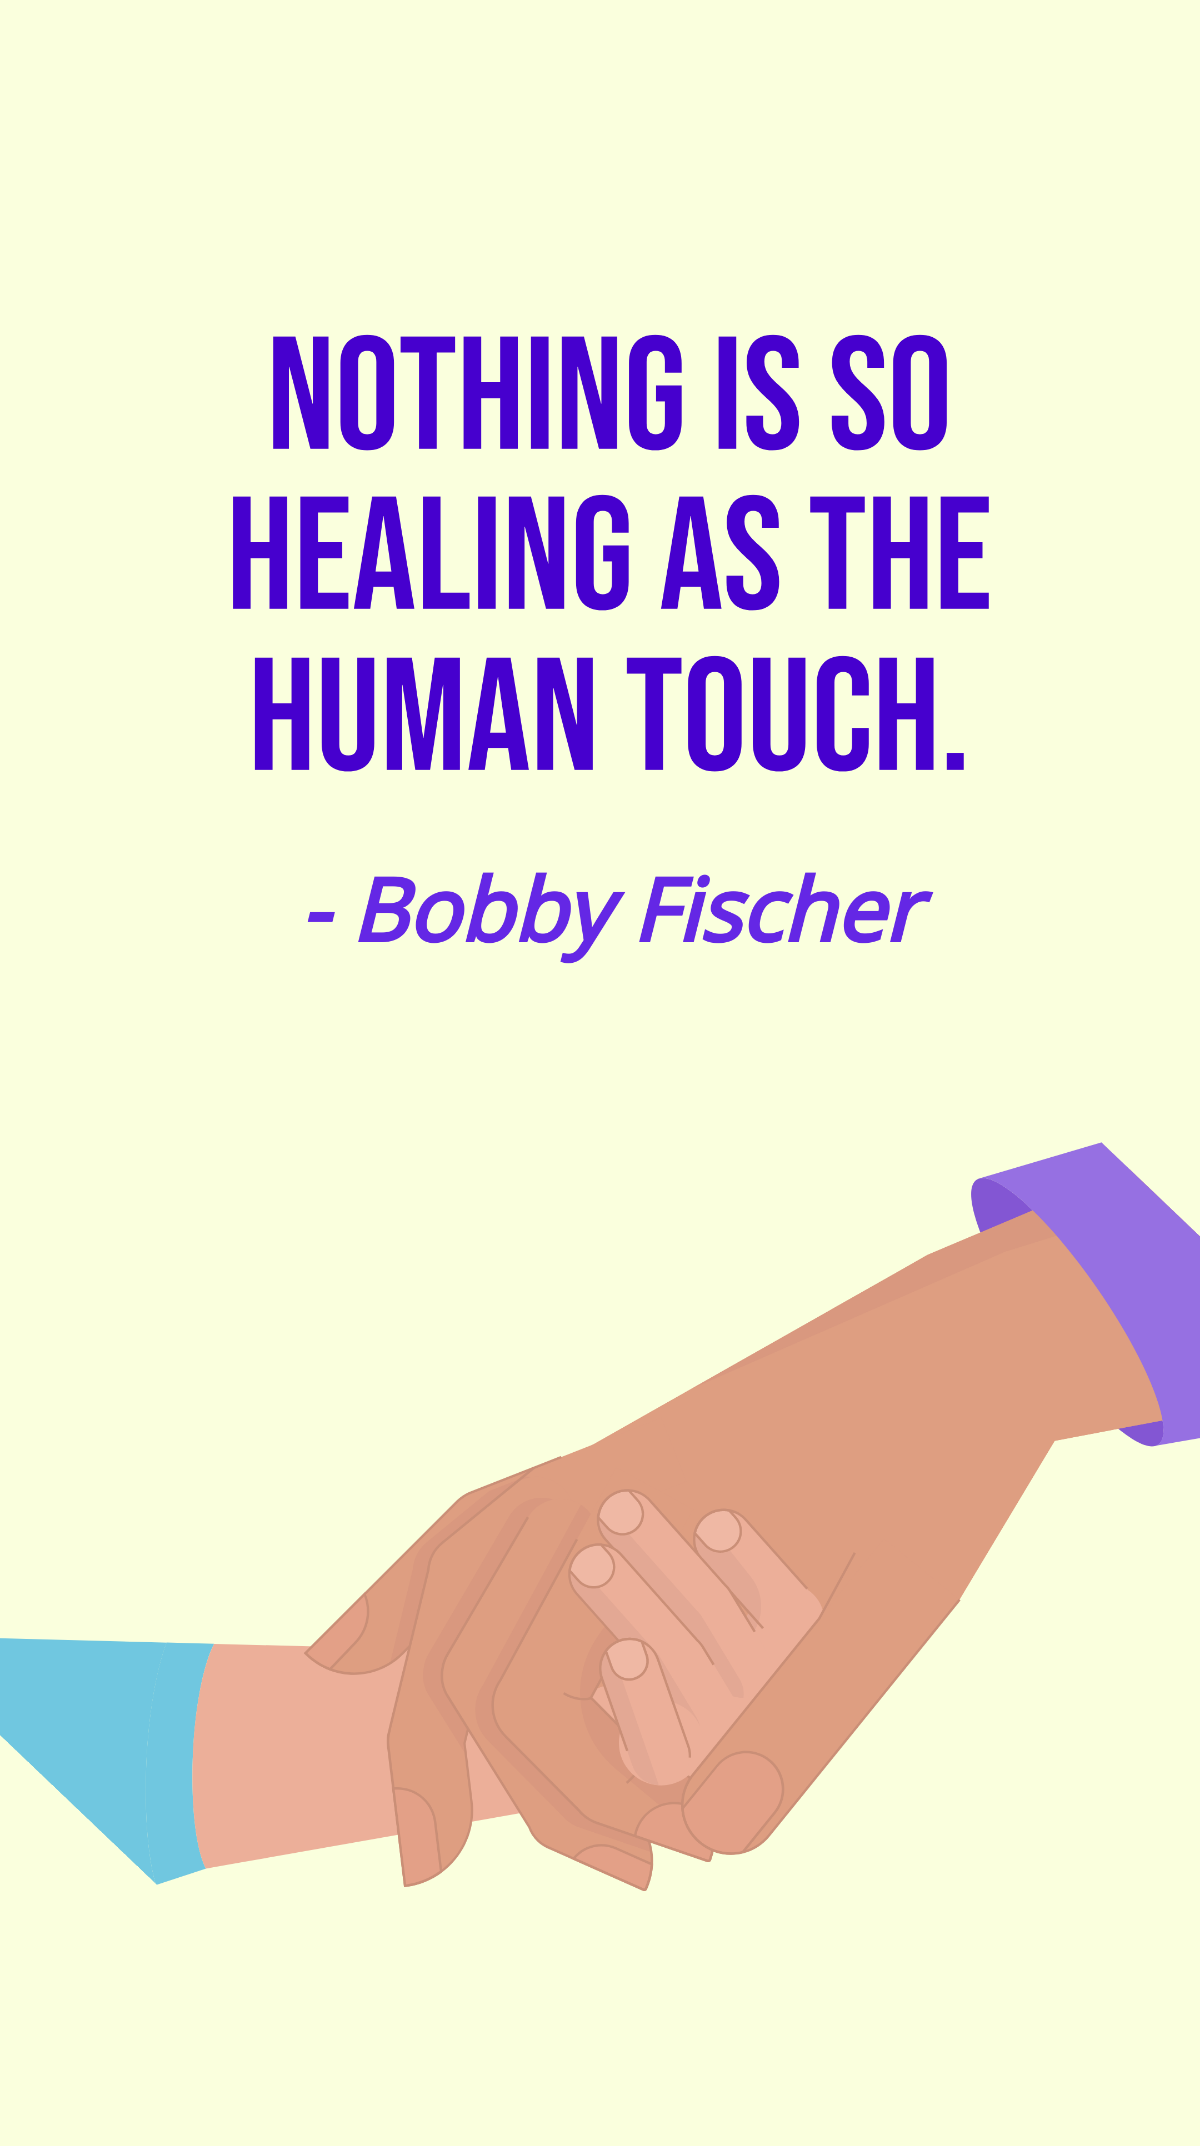 Free Bobby Fischer - Nothing is so healing as the human touch. Template